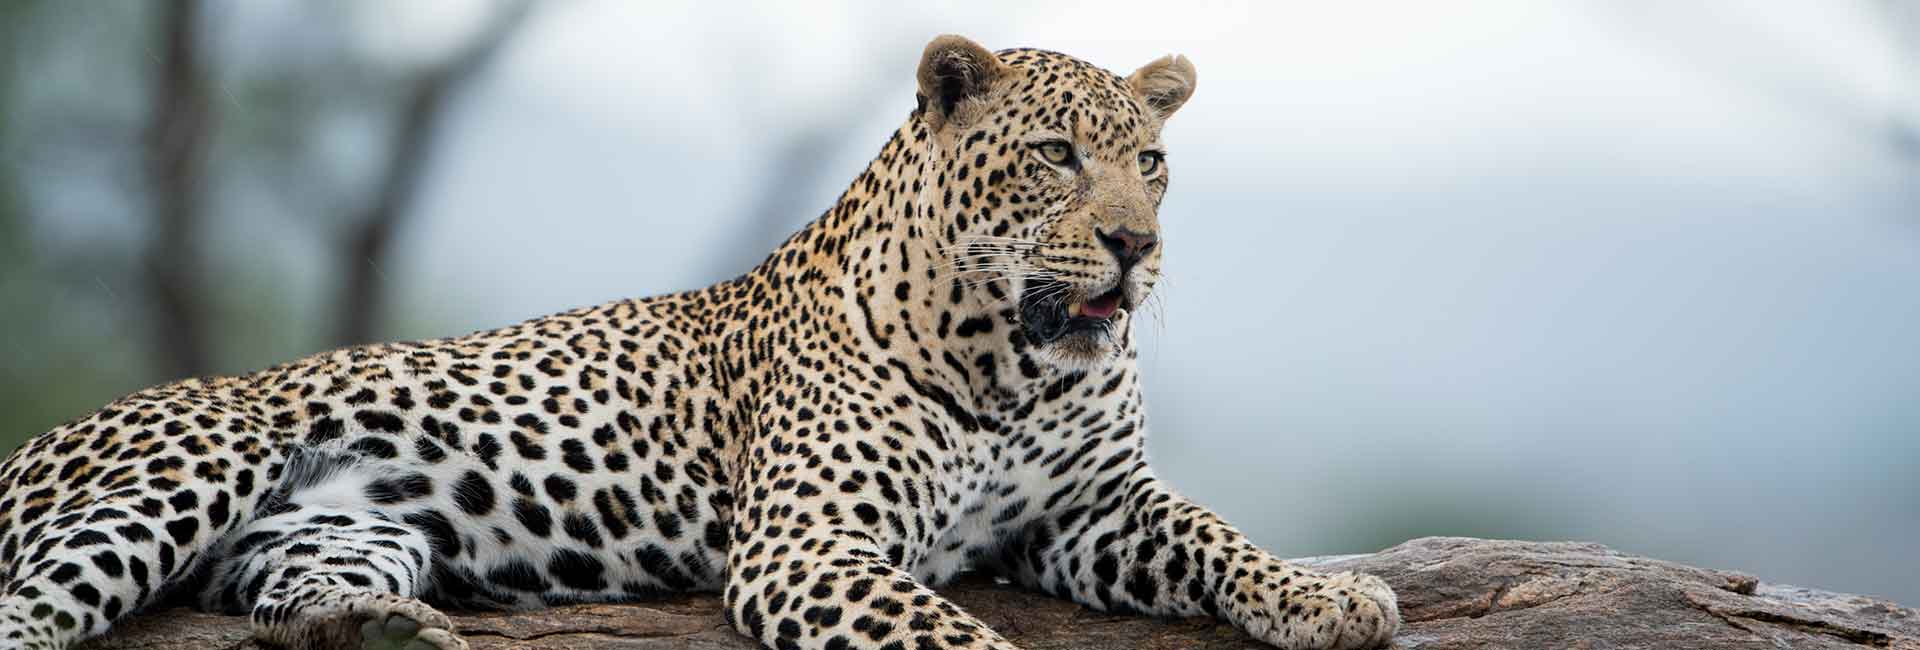 hunting-leopard-iAn-africa-banner